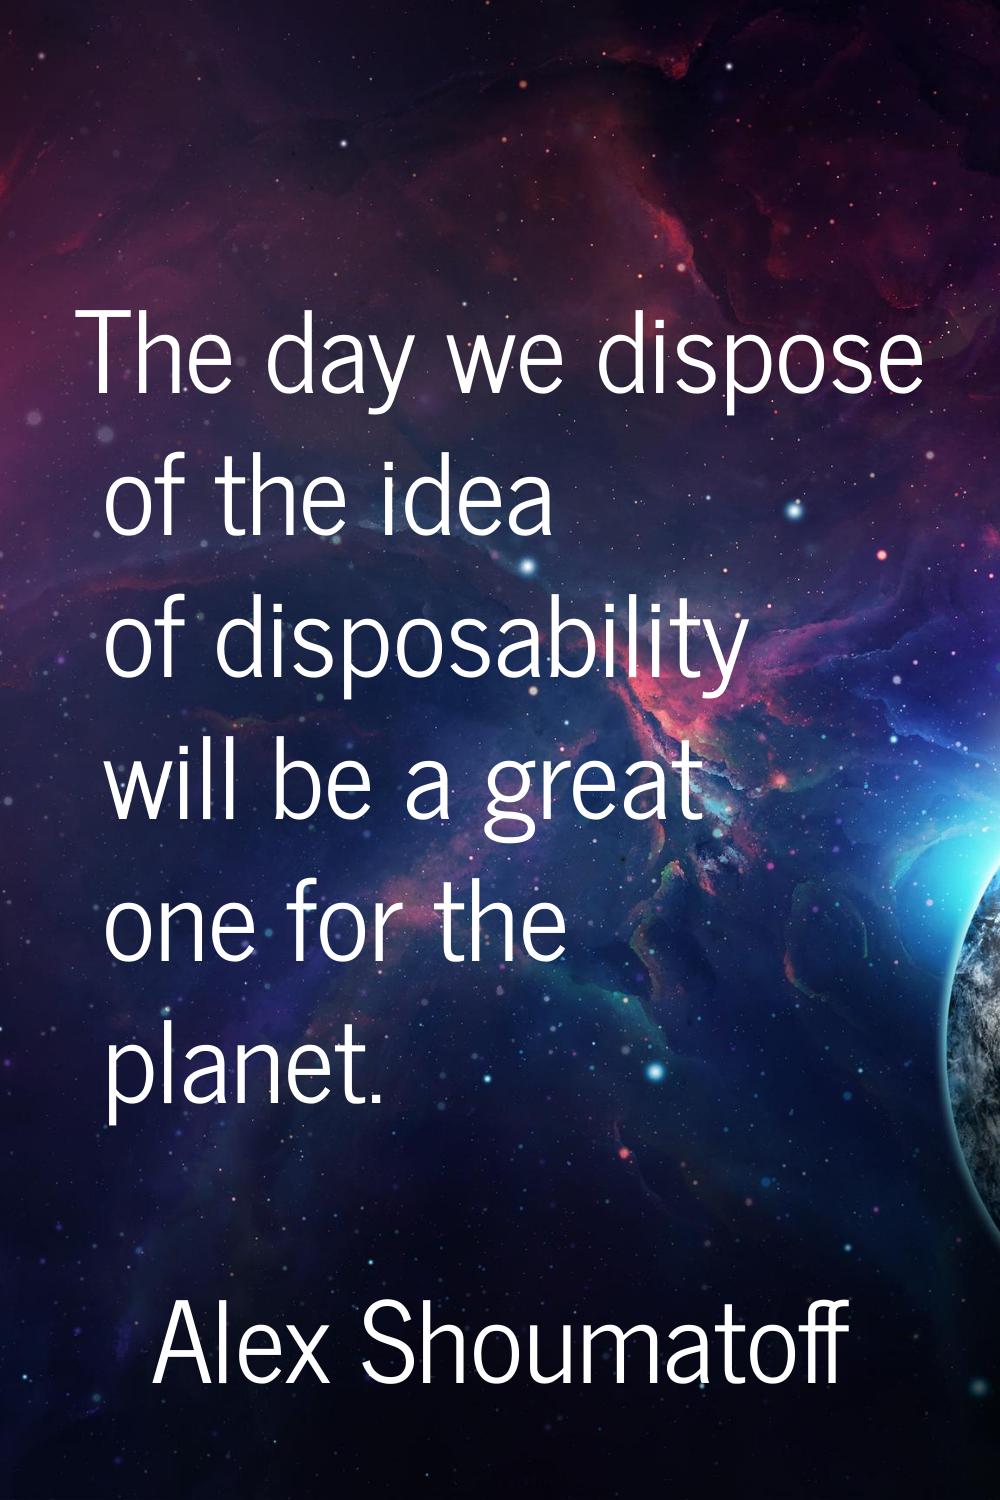 The day we dispose of the idea of disposability will be a great one for the planet.